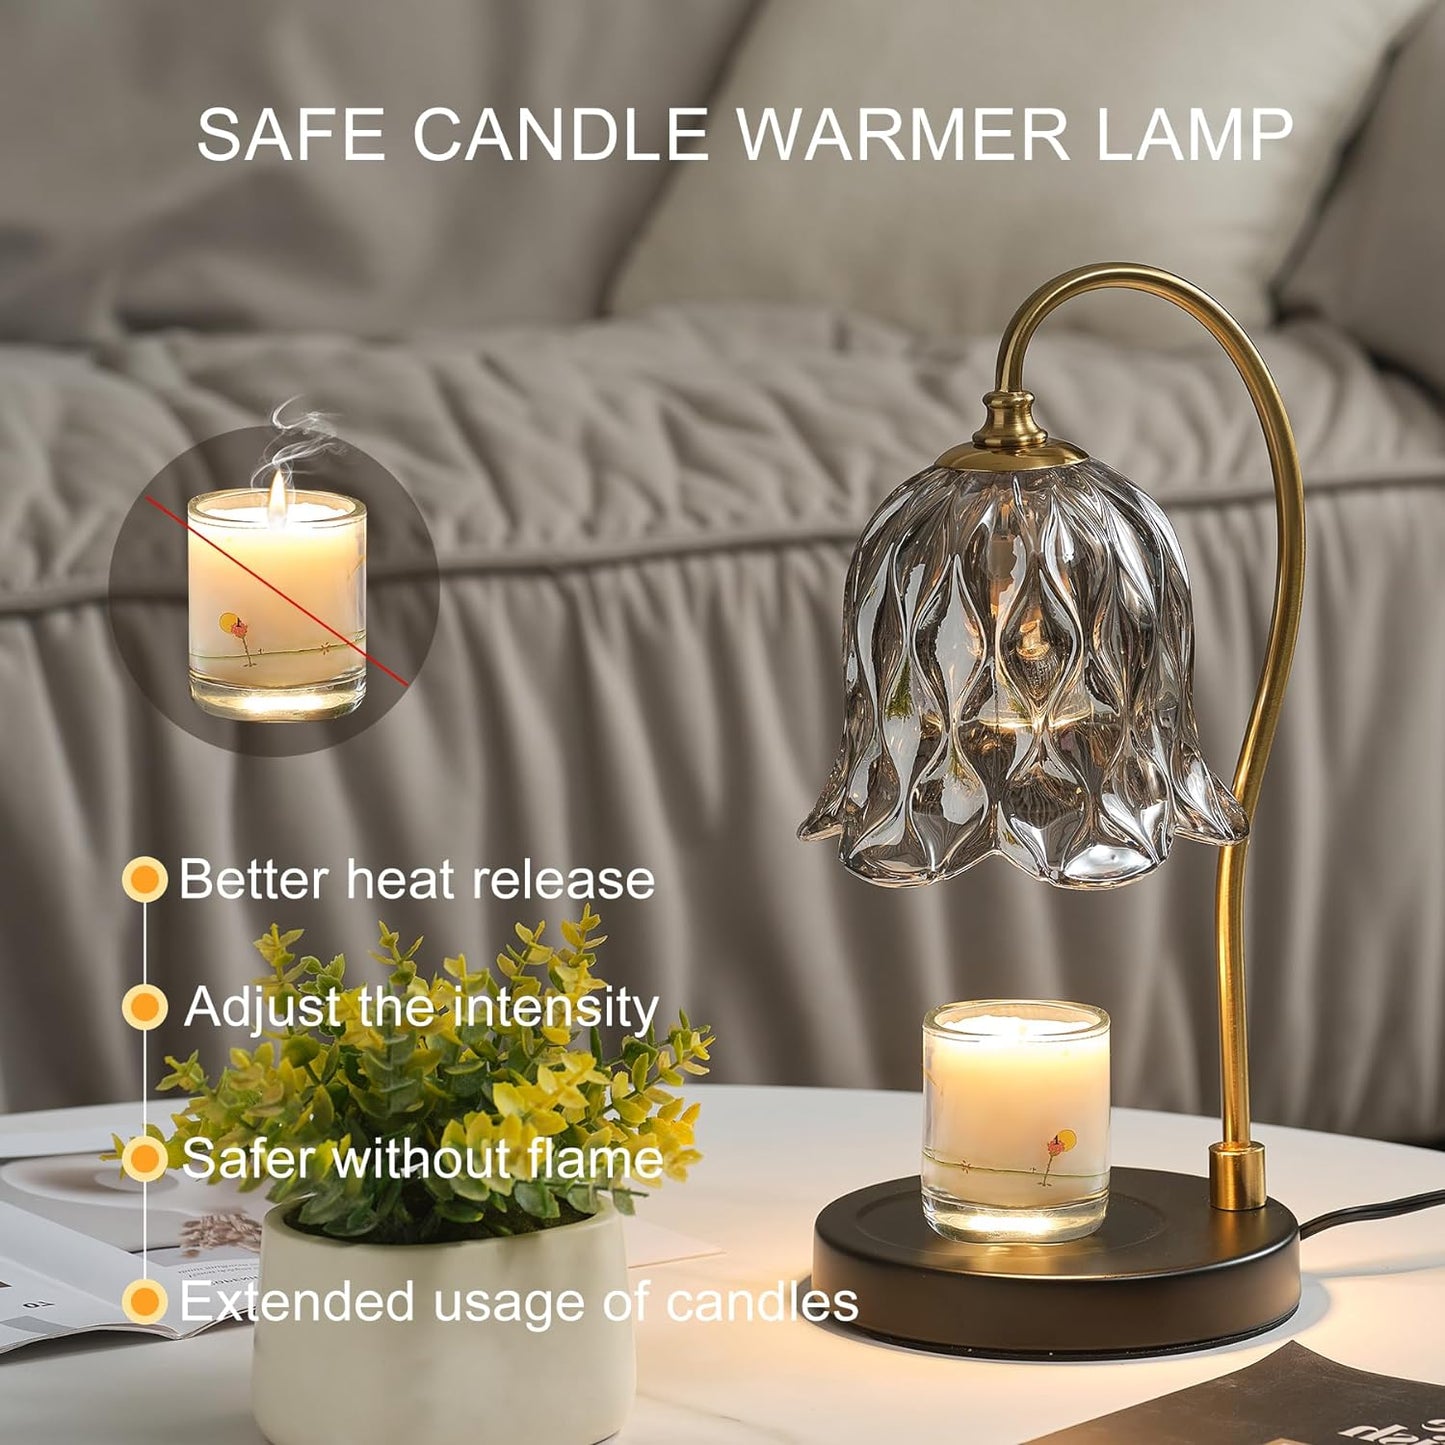 Candle Warmer Lamp, Electric Candle Lamp Warmer, Gifts for Mom, Bedroom Home Decor Dimmable Wax Melt Warmer for Scented Wax with 2 Bulbs, Jar Candles, Mothers Day Gifts